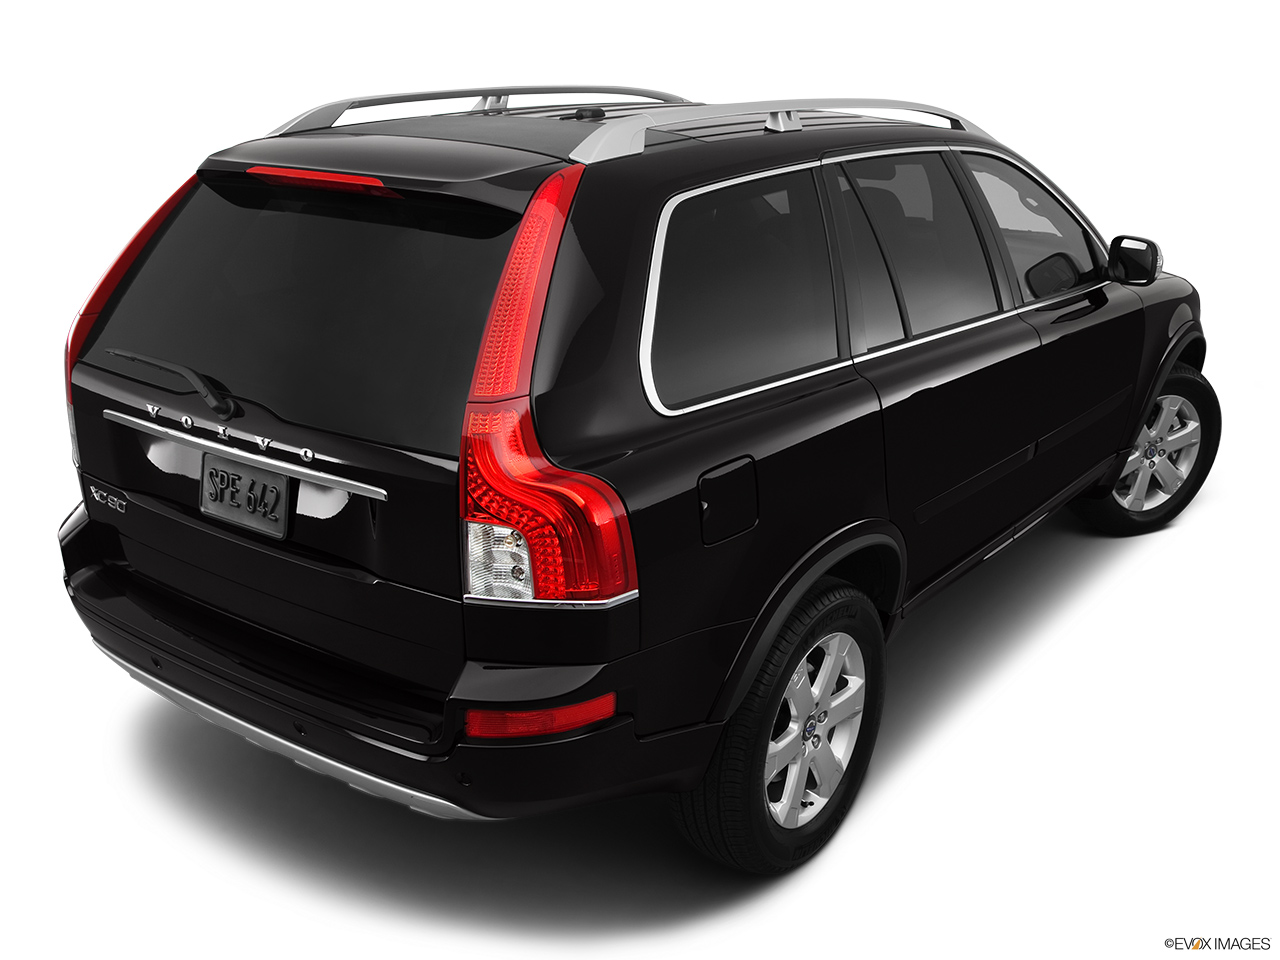 2013 Volvo XC90 3.2 FWD Base Rear 3/4 angle view. 